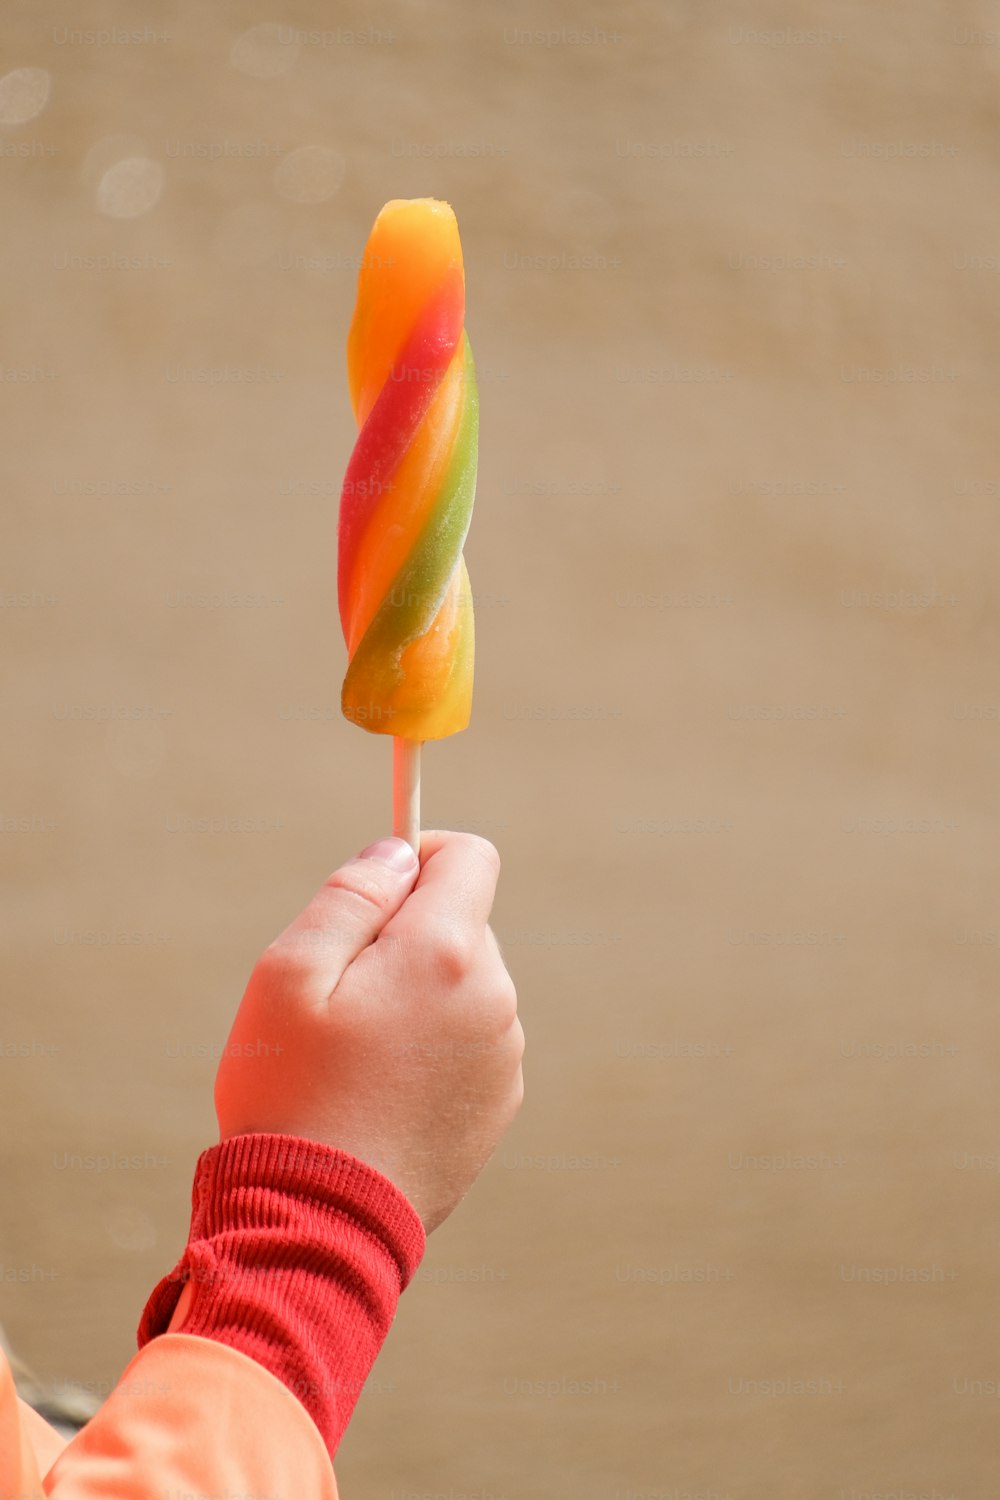 a person holding a colorful lollipop in their hand